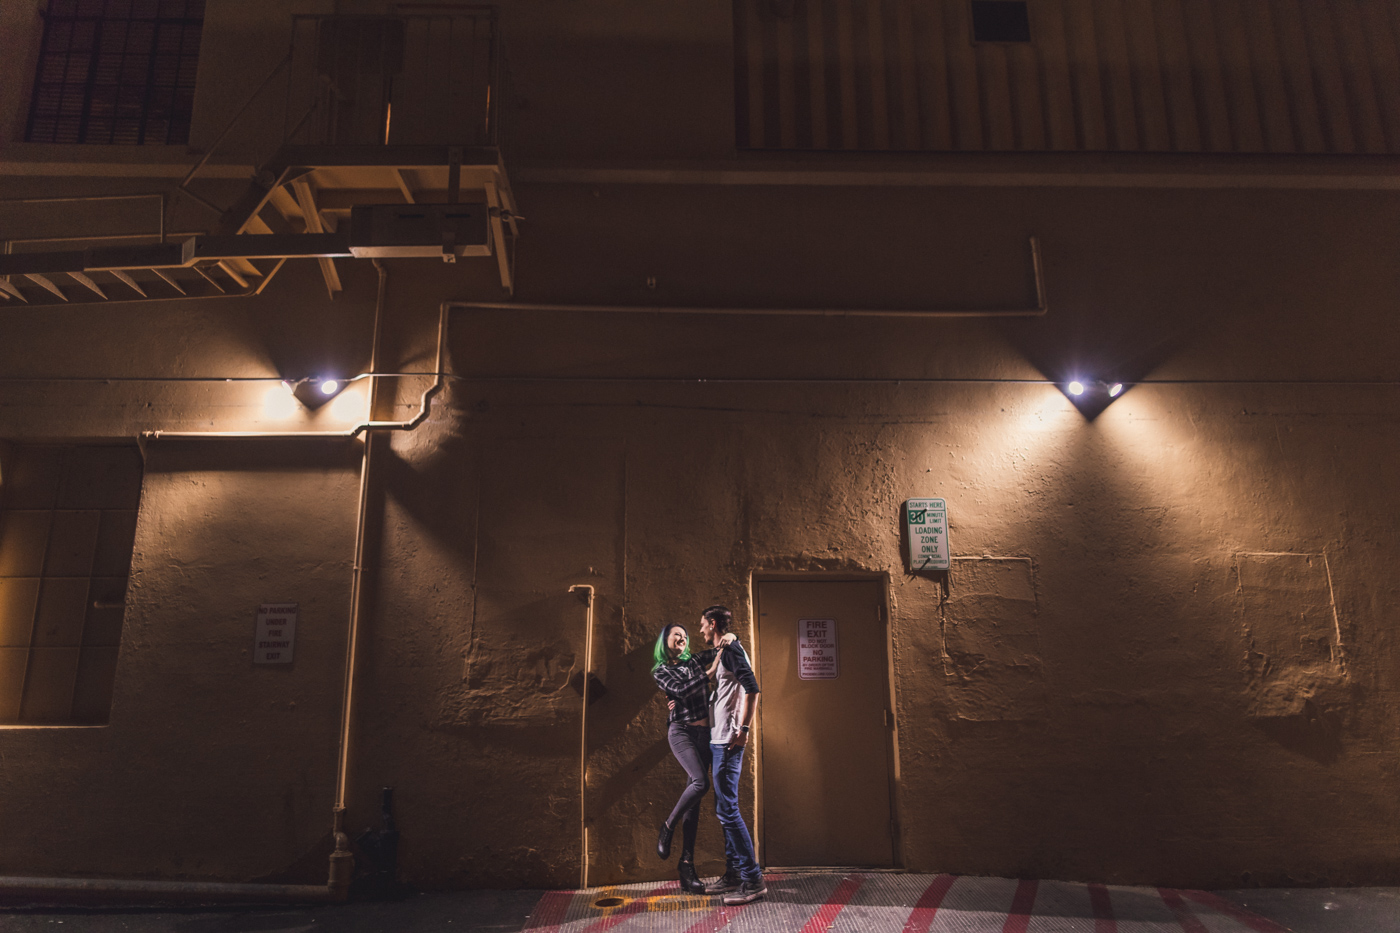 engagement-session-in-alley-at-night